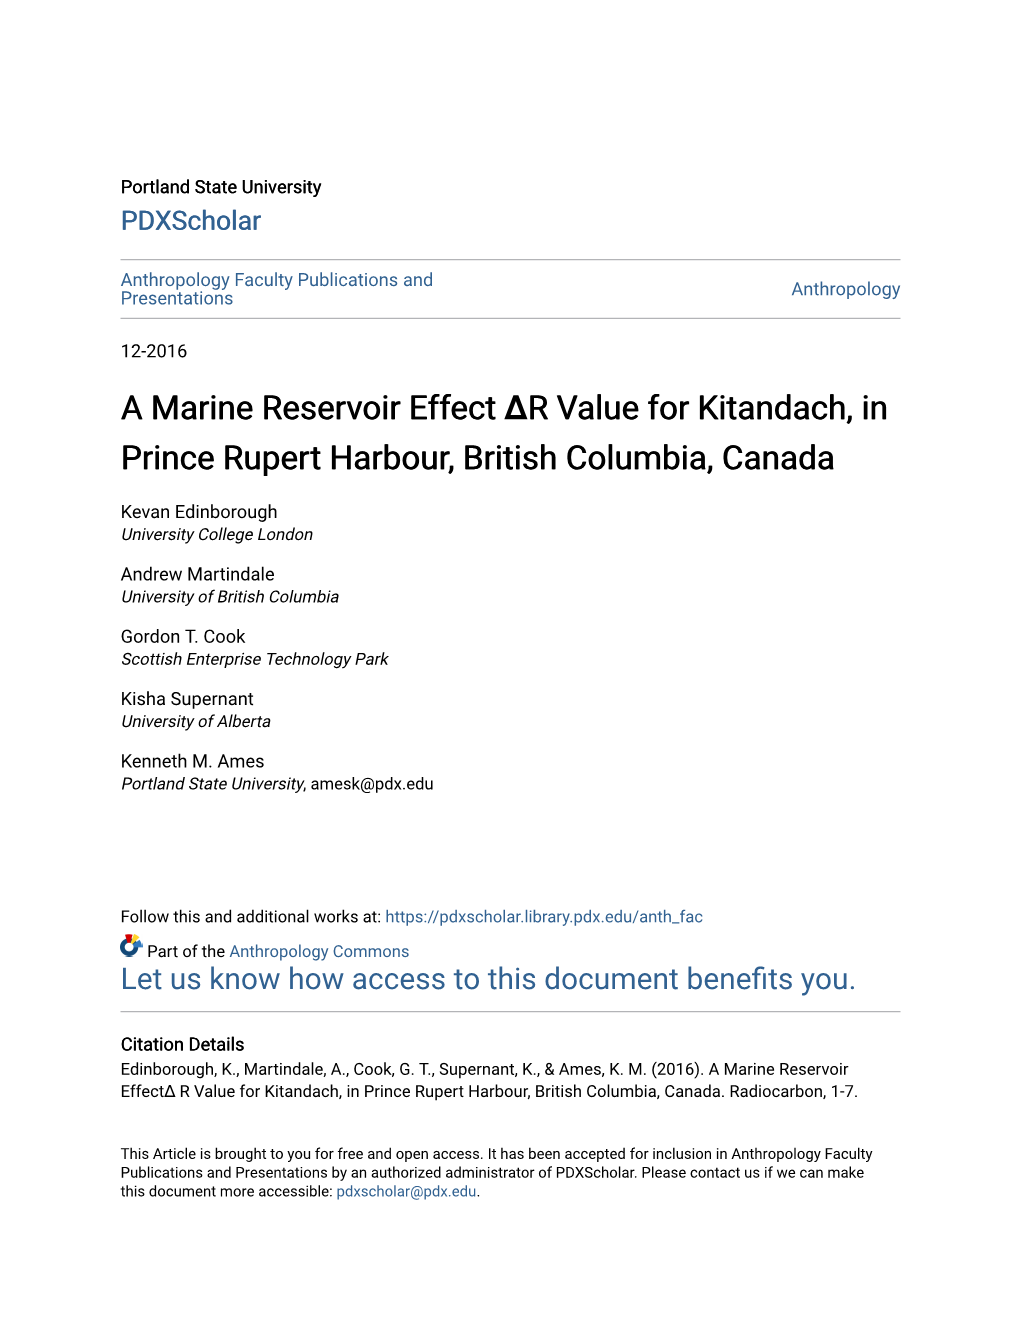 A Marine Reservoir Effect ∆R Value for Kitandach, in Prince Rupert Harbour, British Columbia, Canada